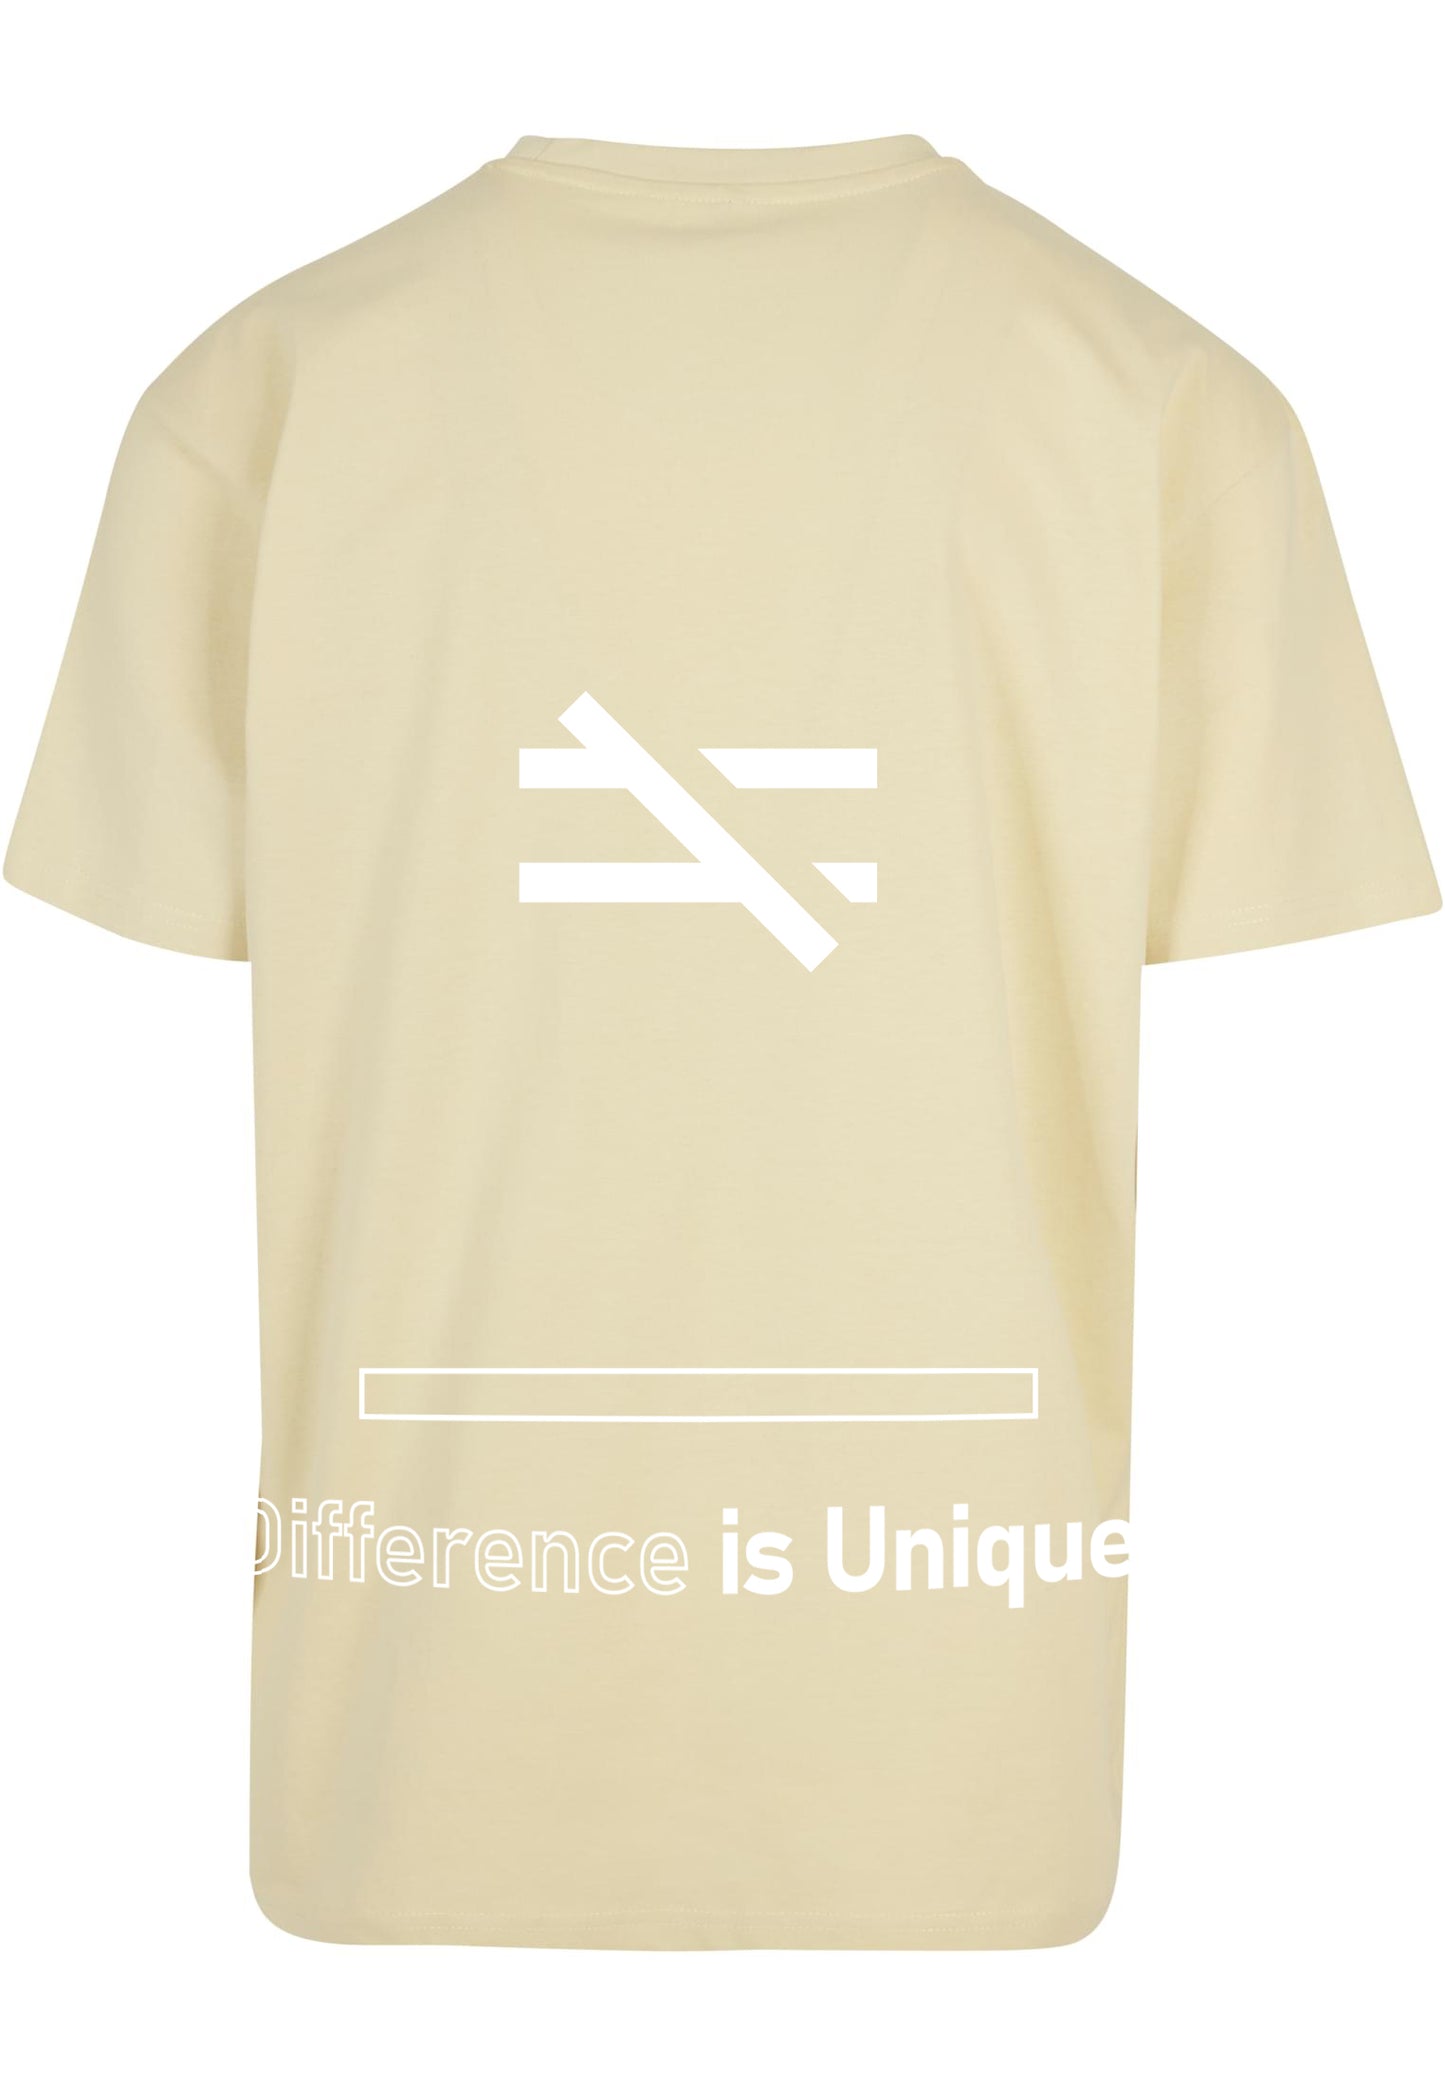 Tee-shirt - Difference is Unique - Jaune doux